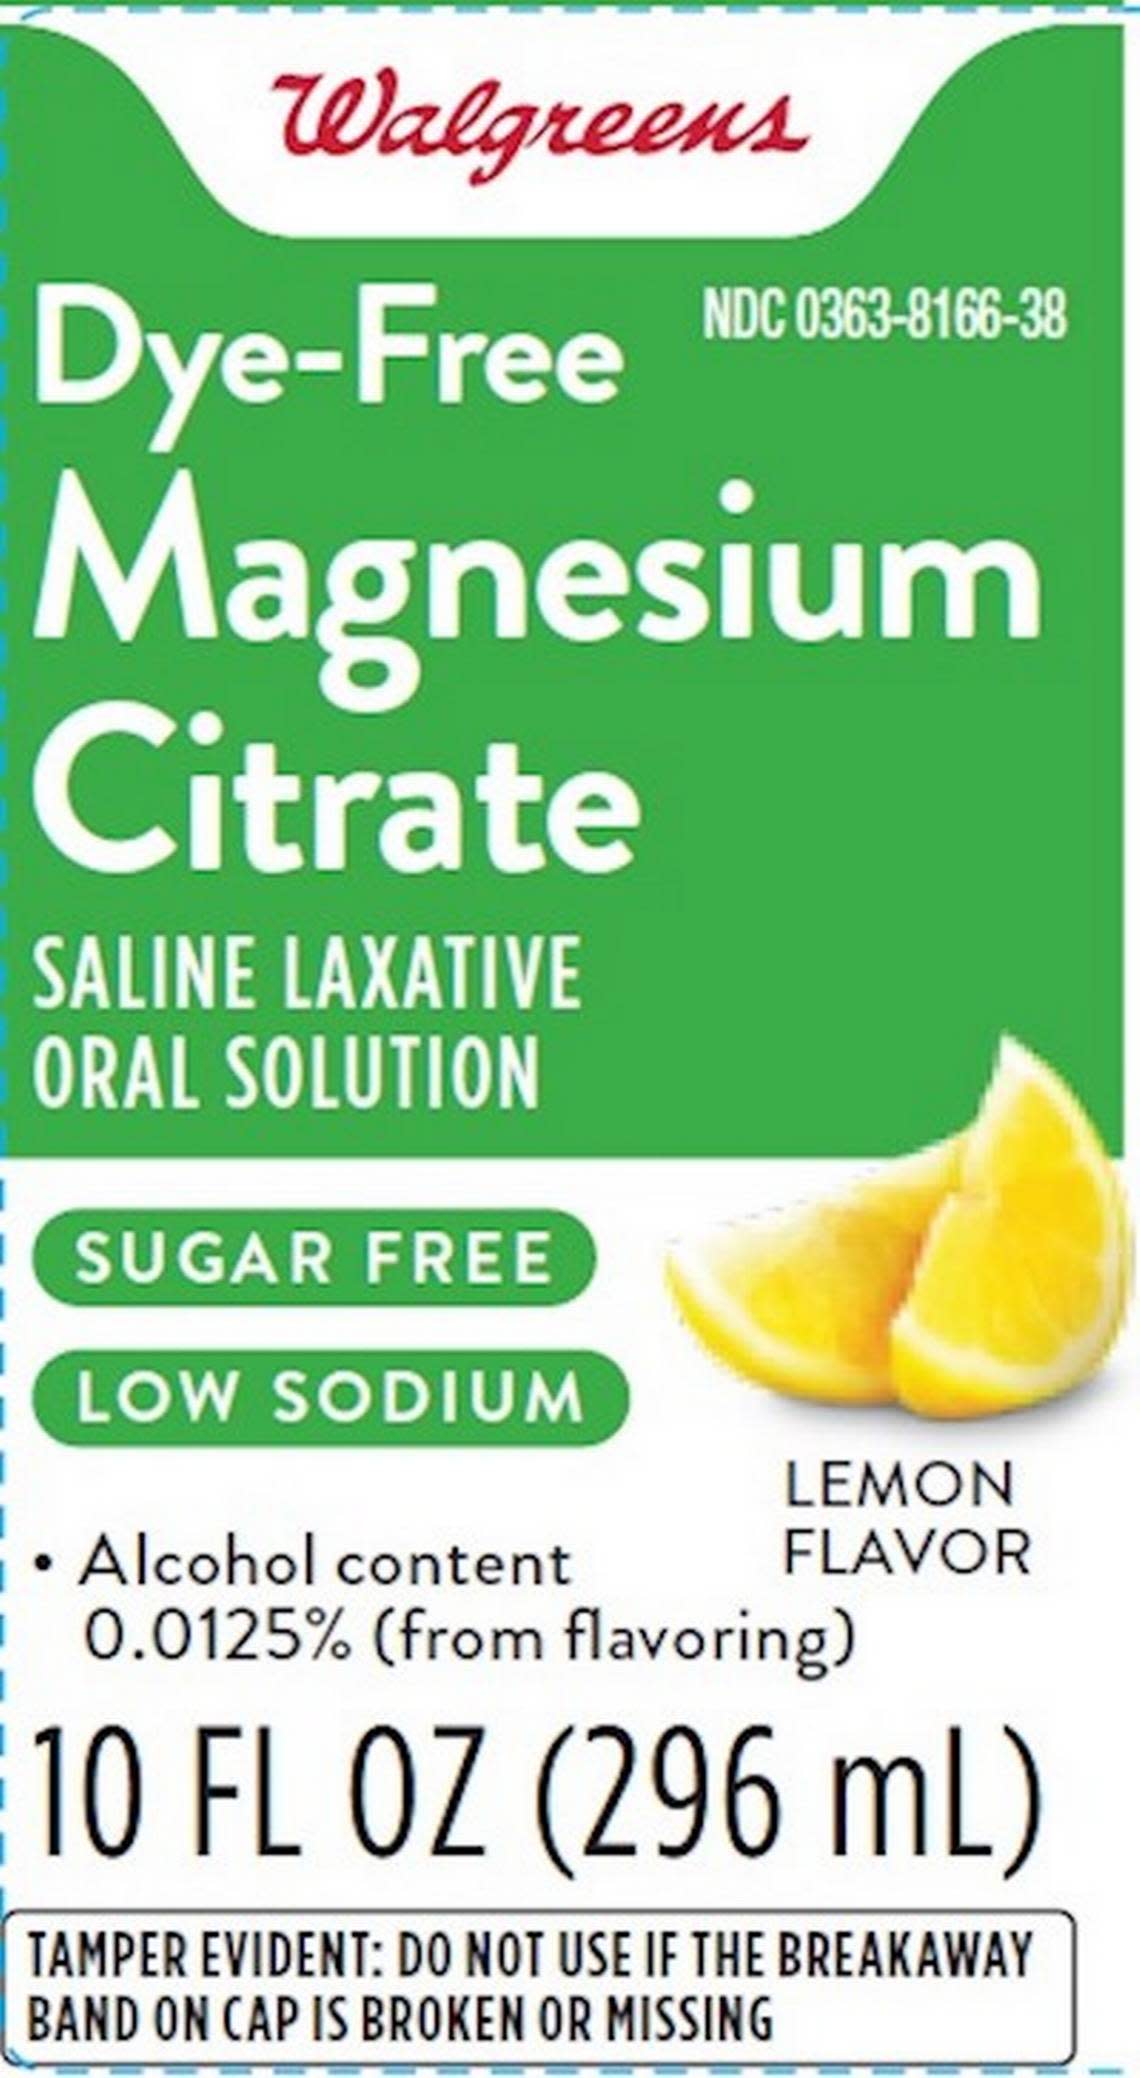 Walgreens Magnesium Citrate laxative